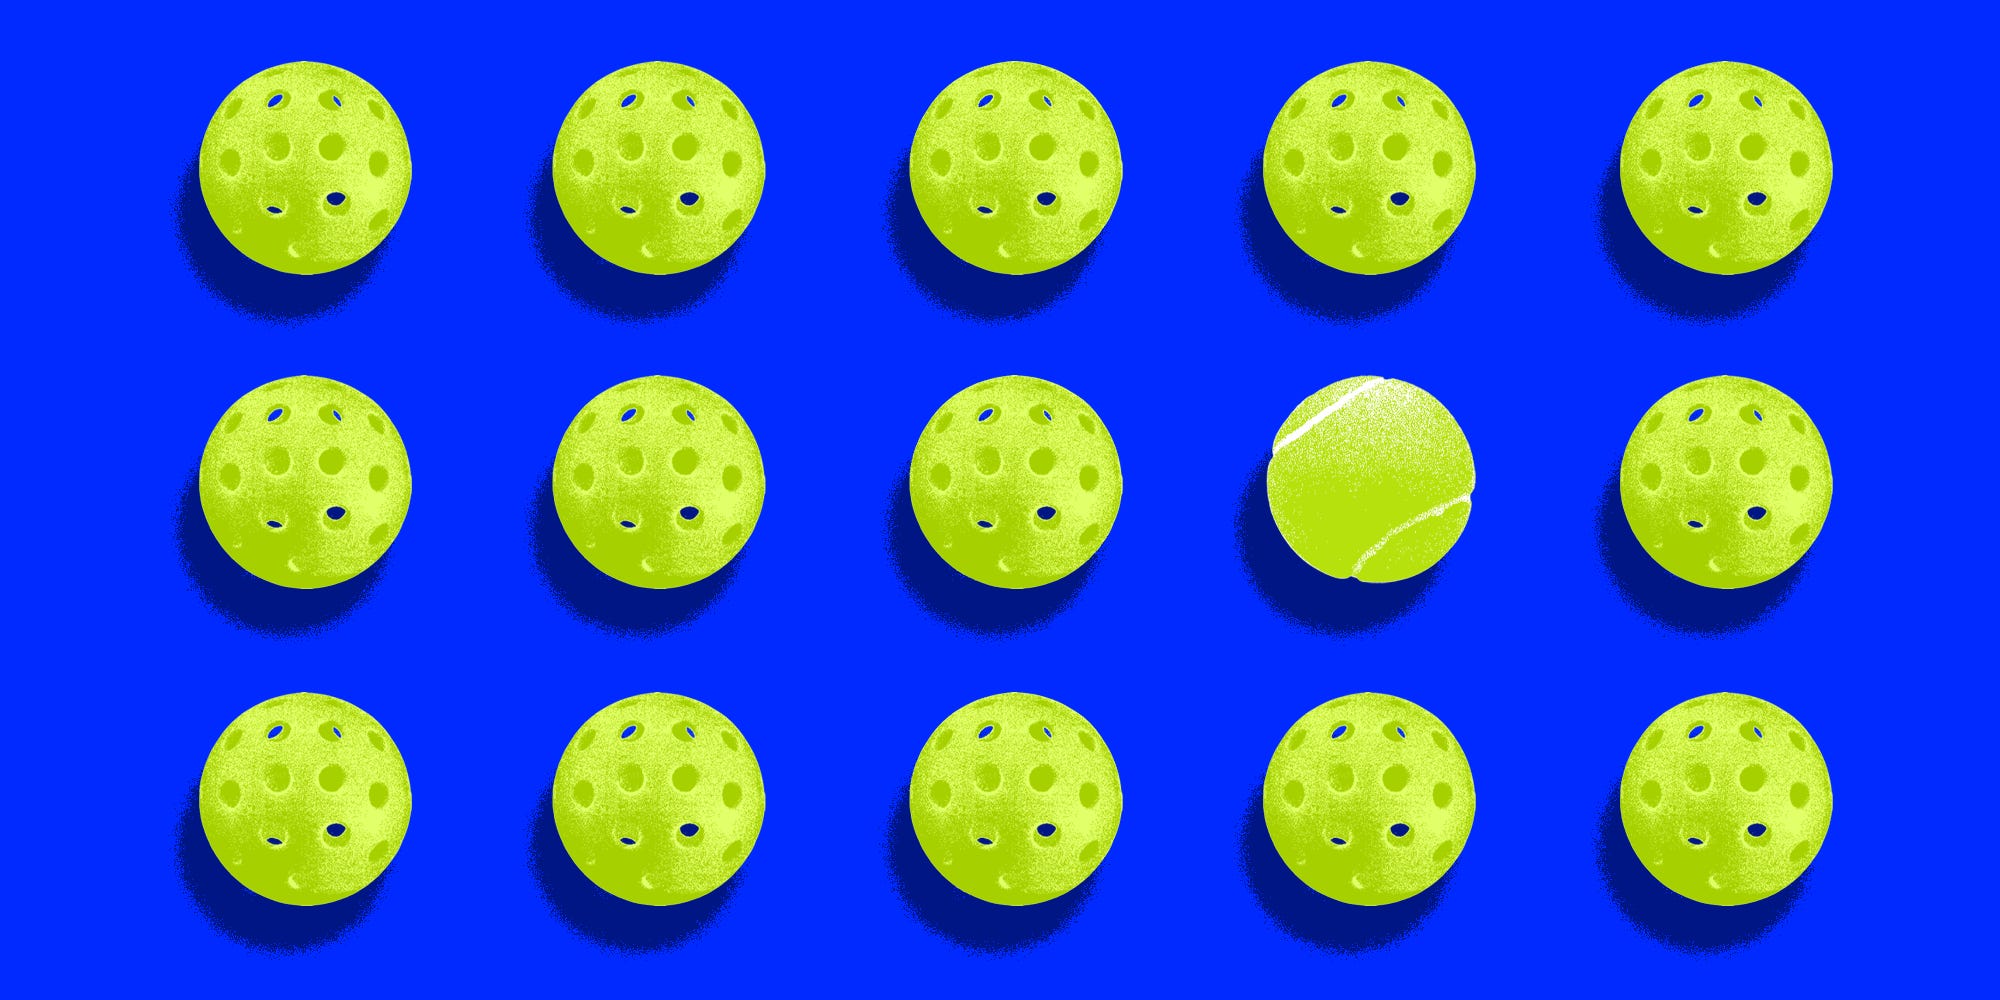 <p>Matches consist of high-flying volleys thanks to the classic tennis ball used. It requires more athletic prowess than pickleball, but the artificial turf surface is easier on the joints.</p><p>For that reason, BI's Padel Haus tour guide said, former and current pro athletes have picked it up as a hobby. According to BoF, David Beckham, Dwyane Wade, and Lionel Messi are regulars at the waterfront padel club in Miami known as Reserve.</p><p>Wayne Boich, the businessman who opened Reserve, told BoF that <a href="https://www.businessinsider.com/list-top-watch-brands-in-silicon-valley-tech-elite-2023-7">luxury watchmaker Richard Mille</a> sponsors its annual pro tournament.</p>